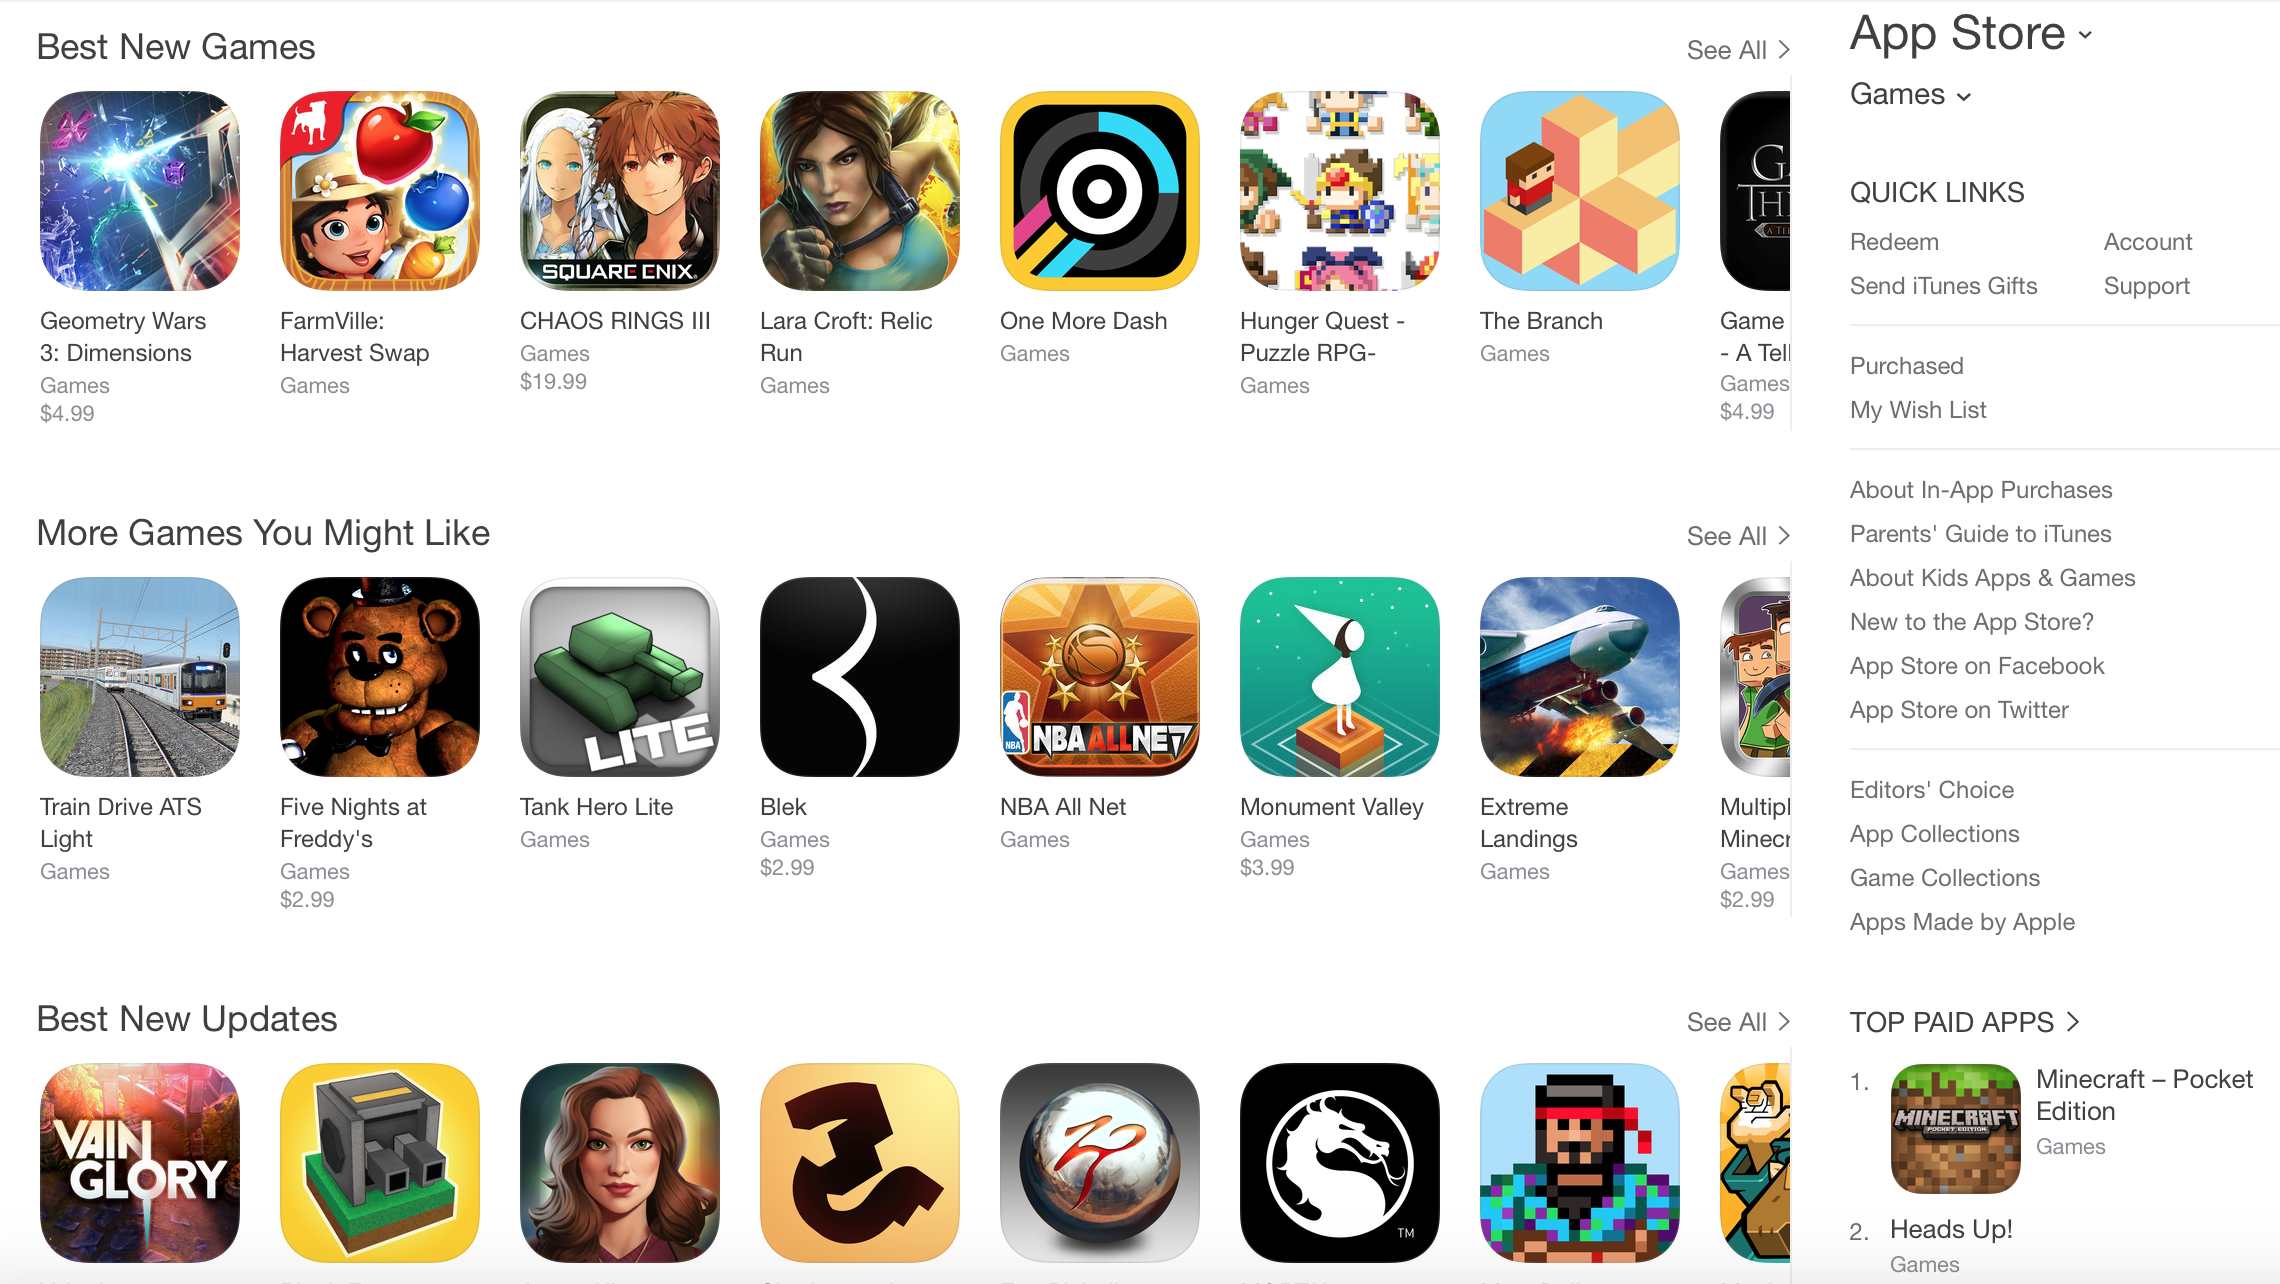 Apple switches to editorially curated lists for App Store game